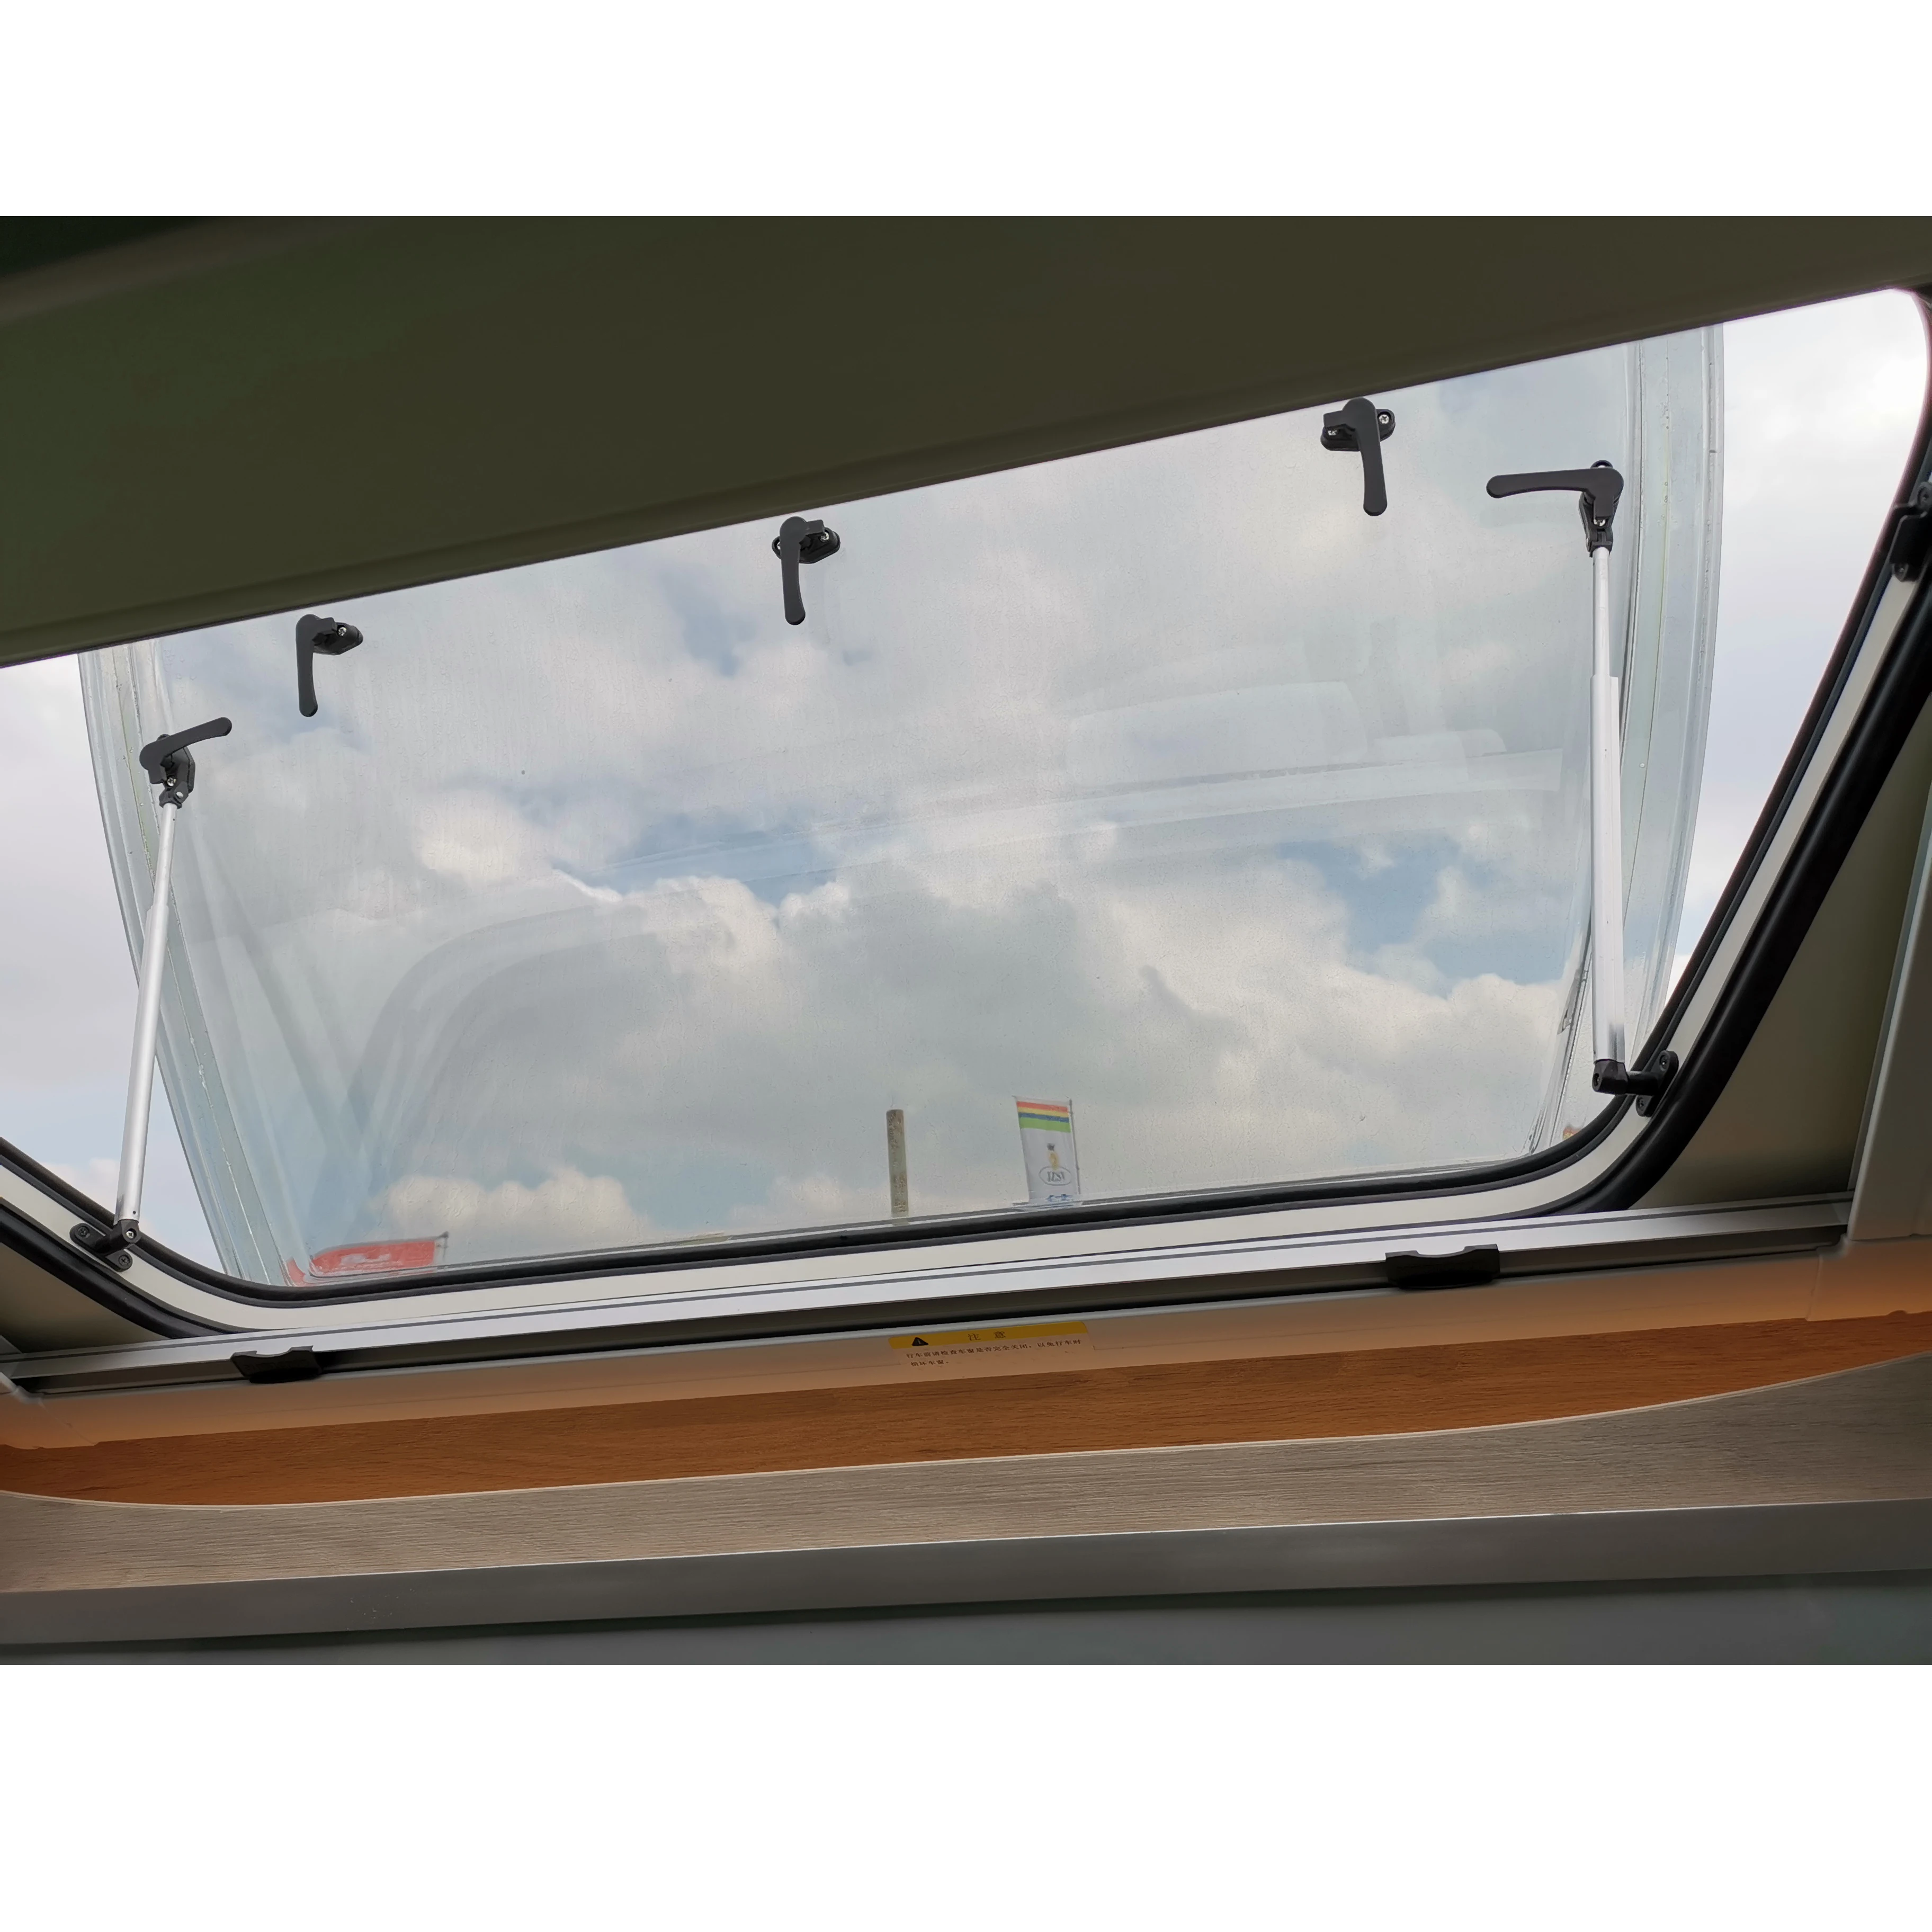 Maygood Curved Top Roof Rv Window with E Mark MG18TW for rv caravan campervan motorhome (62487038990)